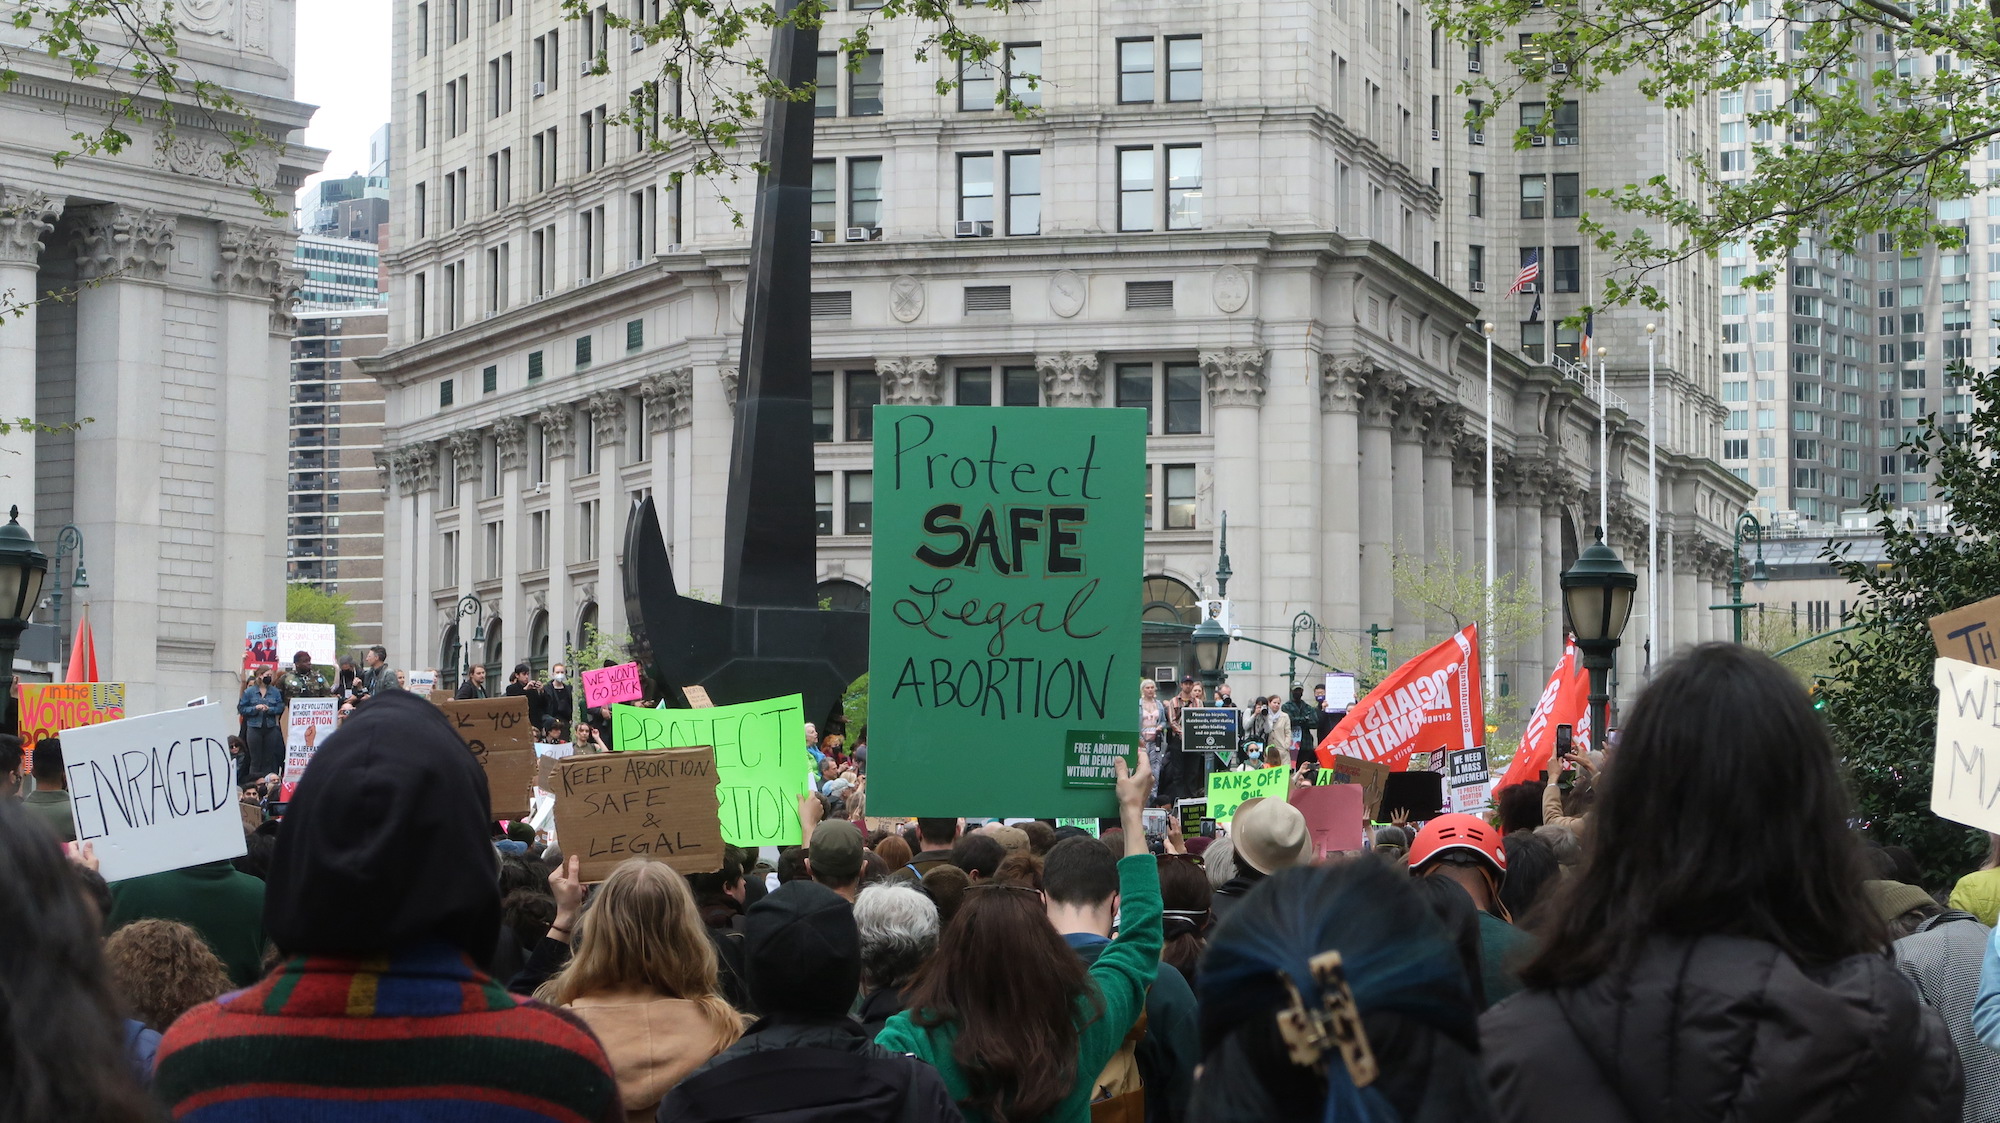 A crowd of protesters faces an elevated group of speakers. A green sign in the center reads “Protect safe legal abortion”